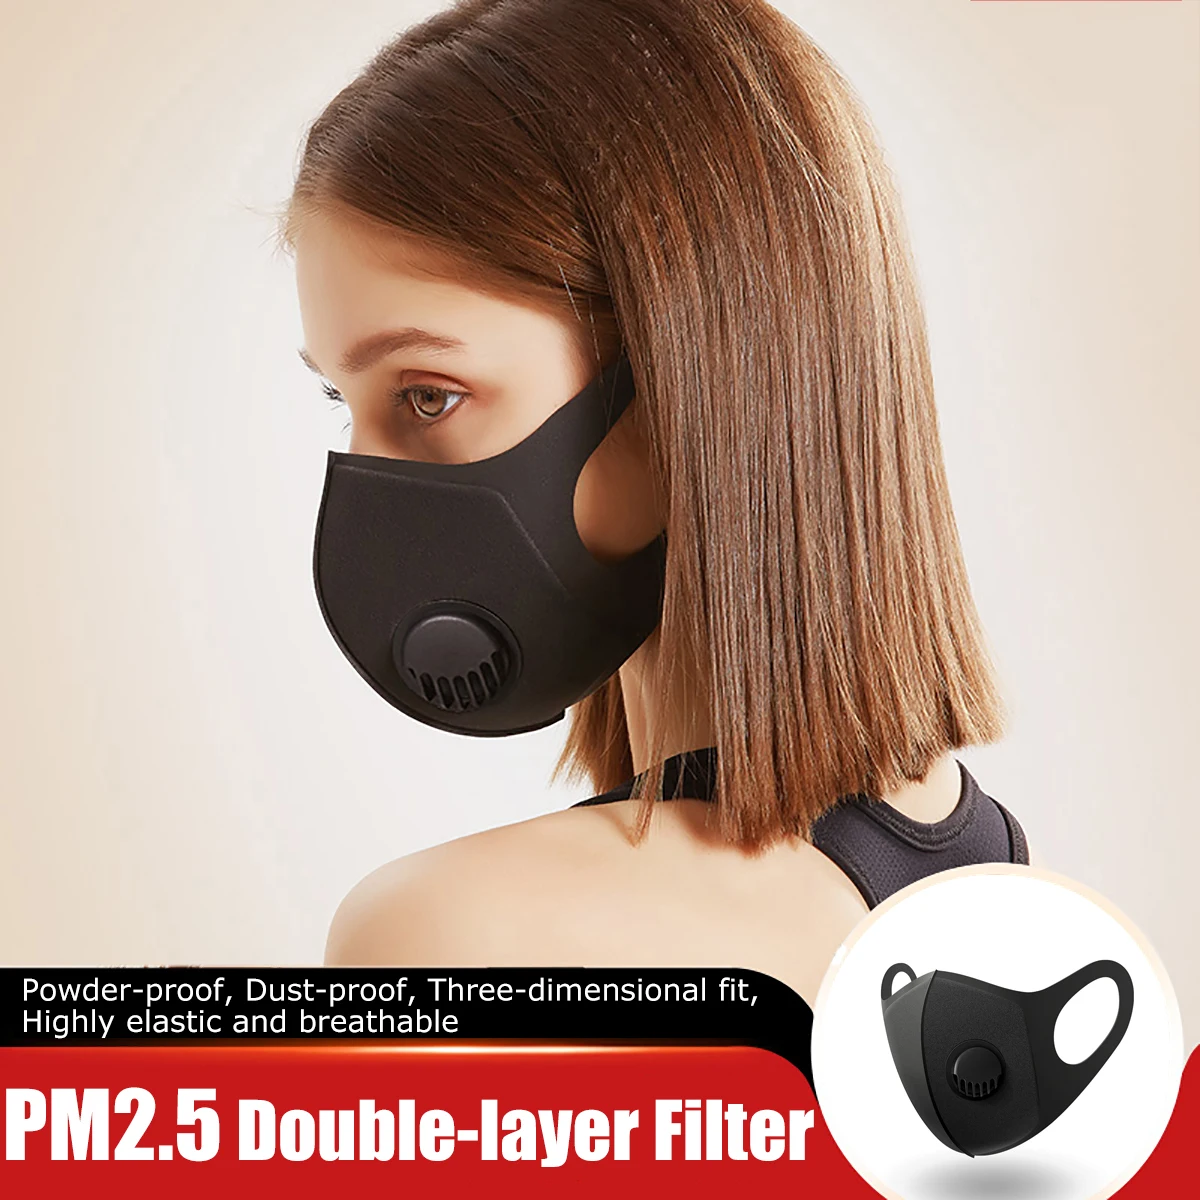 

korean Cotton Anti Dust Mouth Face Mask Kpop Unisex mask with 2pcs Carbon Filter Medical KN95 Anti PM2.5 Black Mouth-muffle Mask